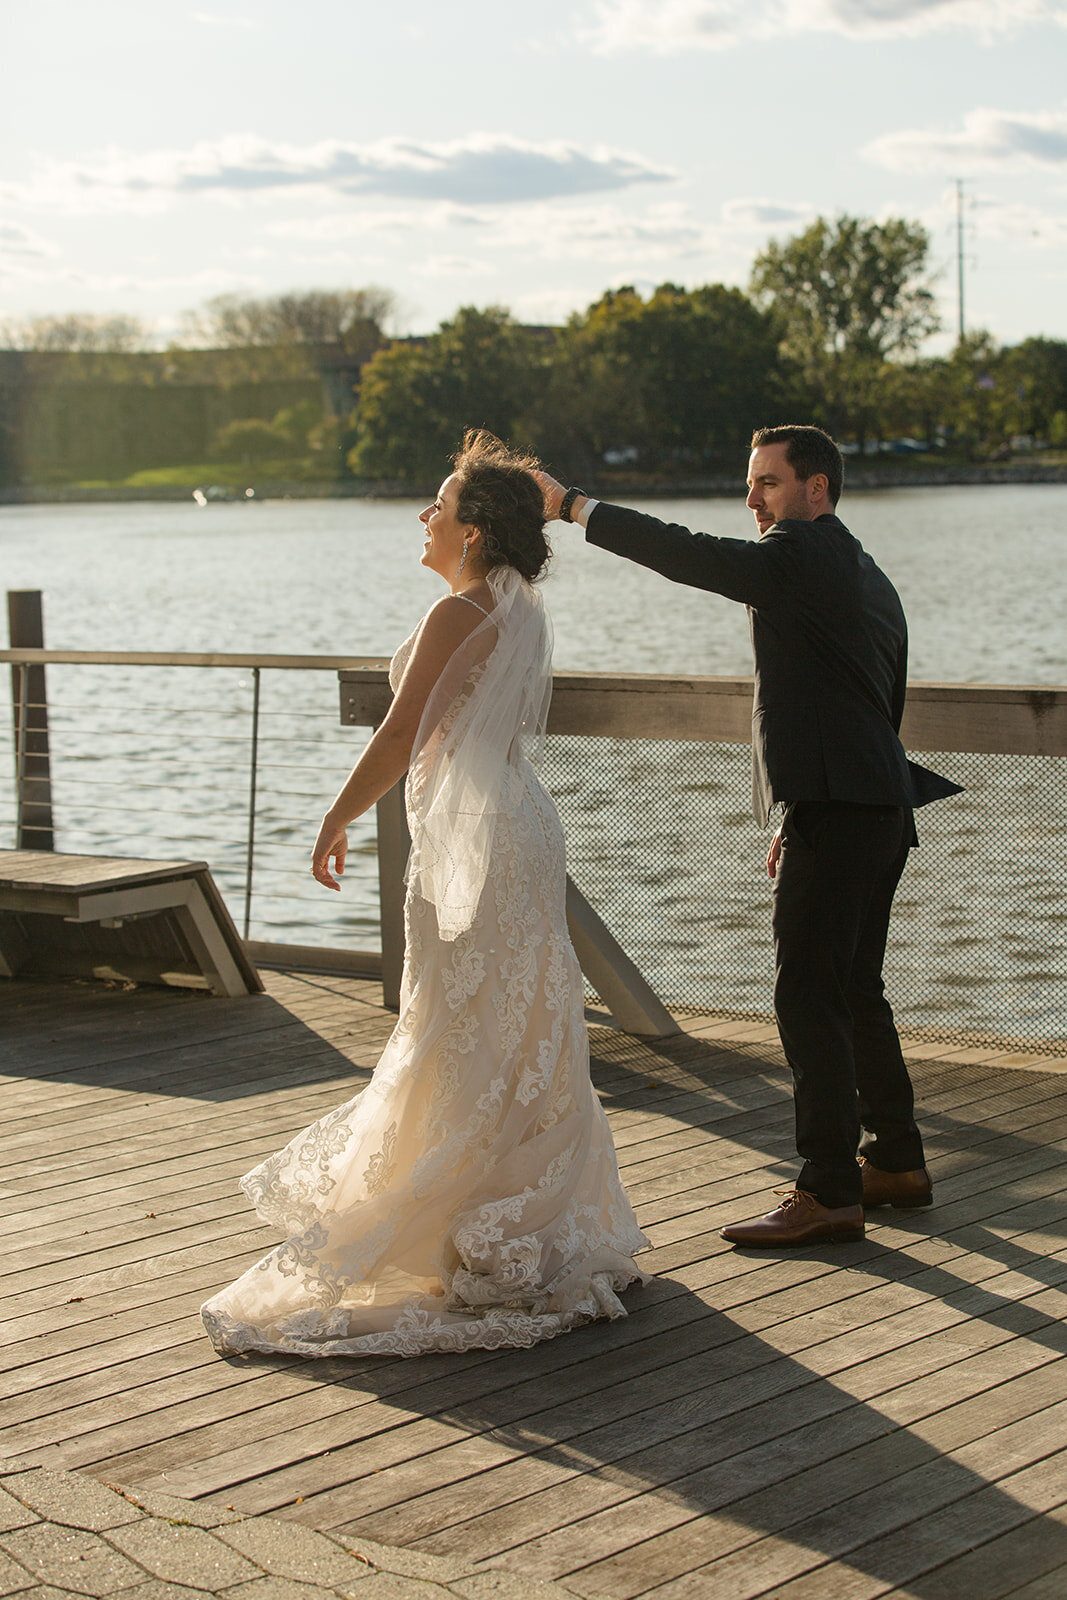 Bride and groom dancing on City Deck in Green Bay waterfront